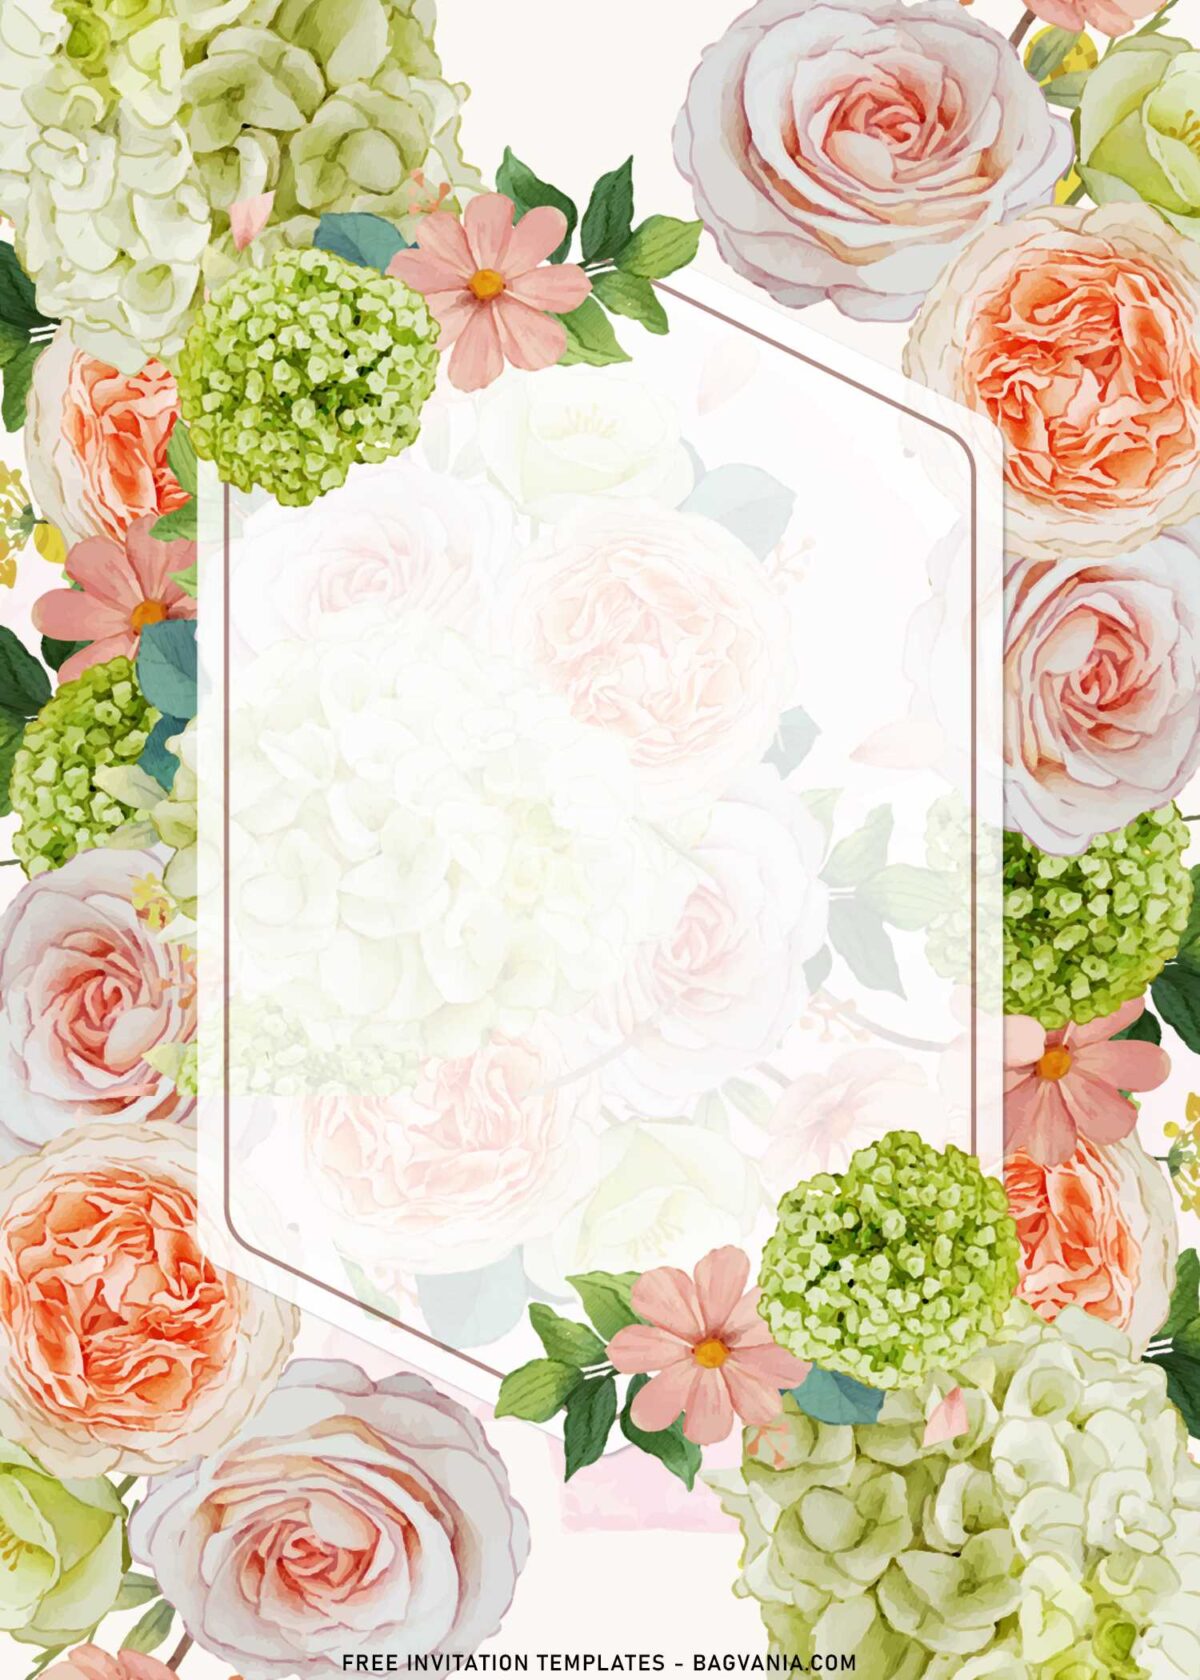 10+ Beautiful Blush And Peach Roses Birthday Invitation Templates with gorgeous daisy